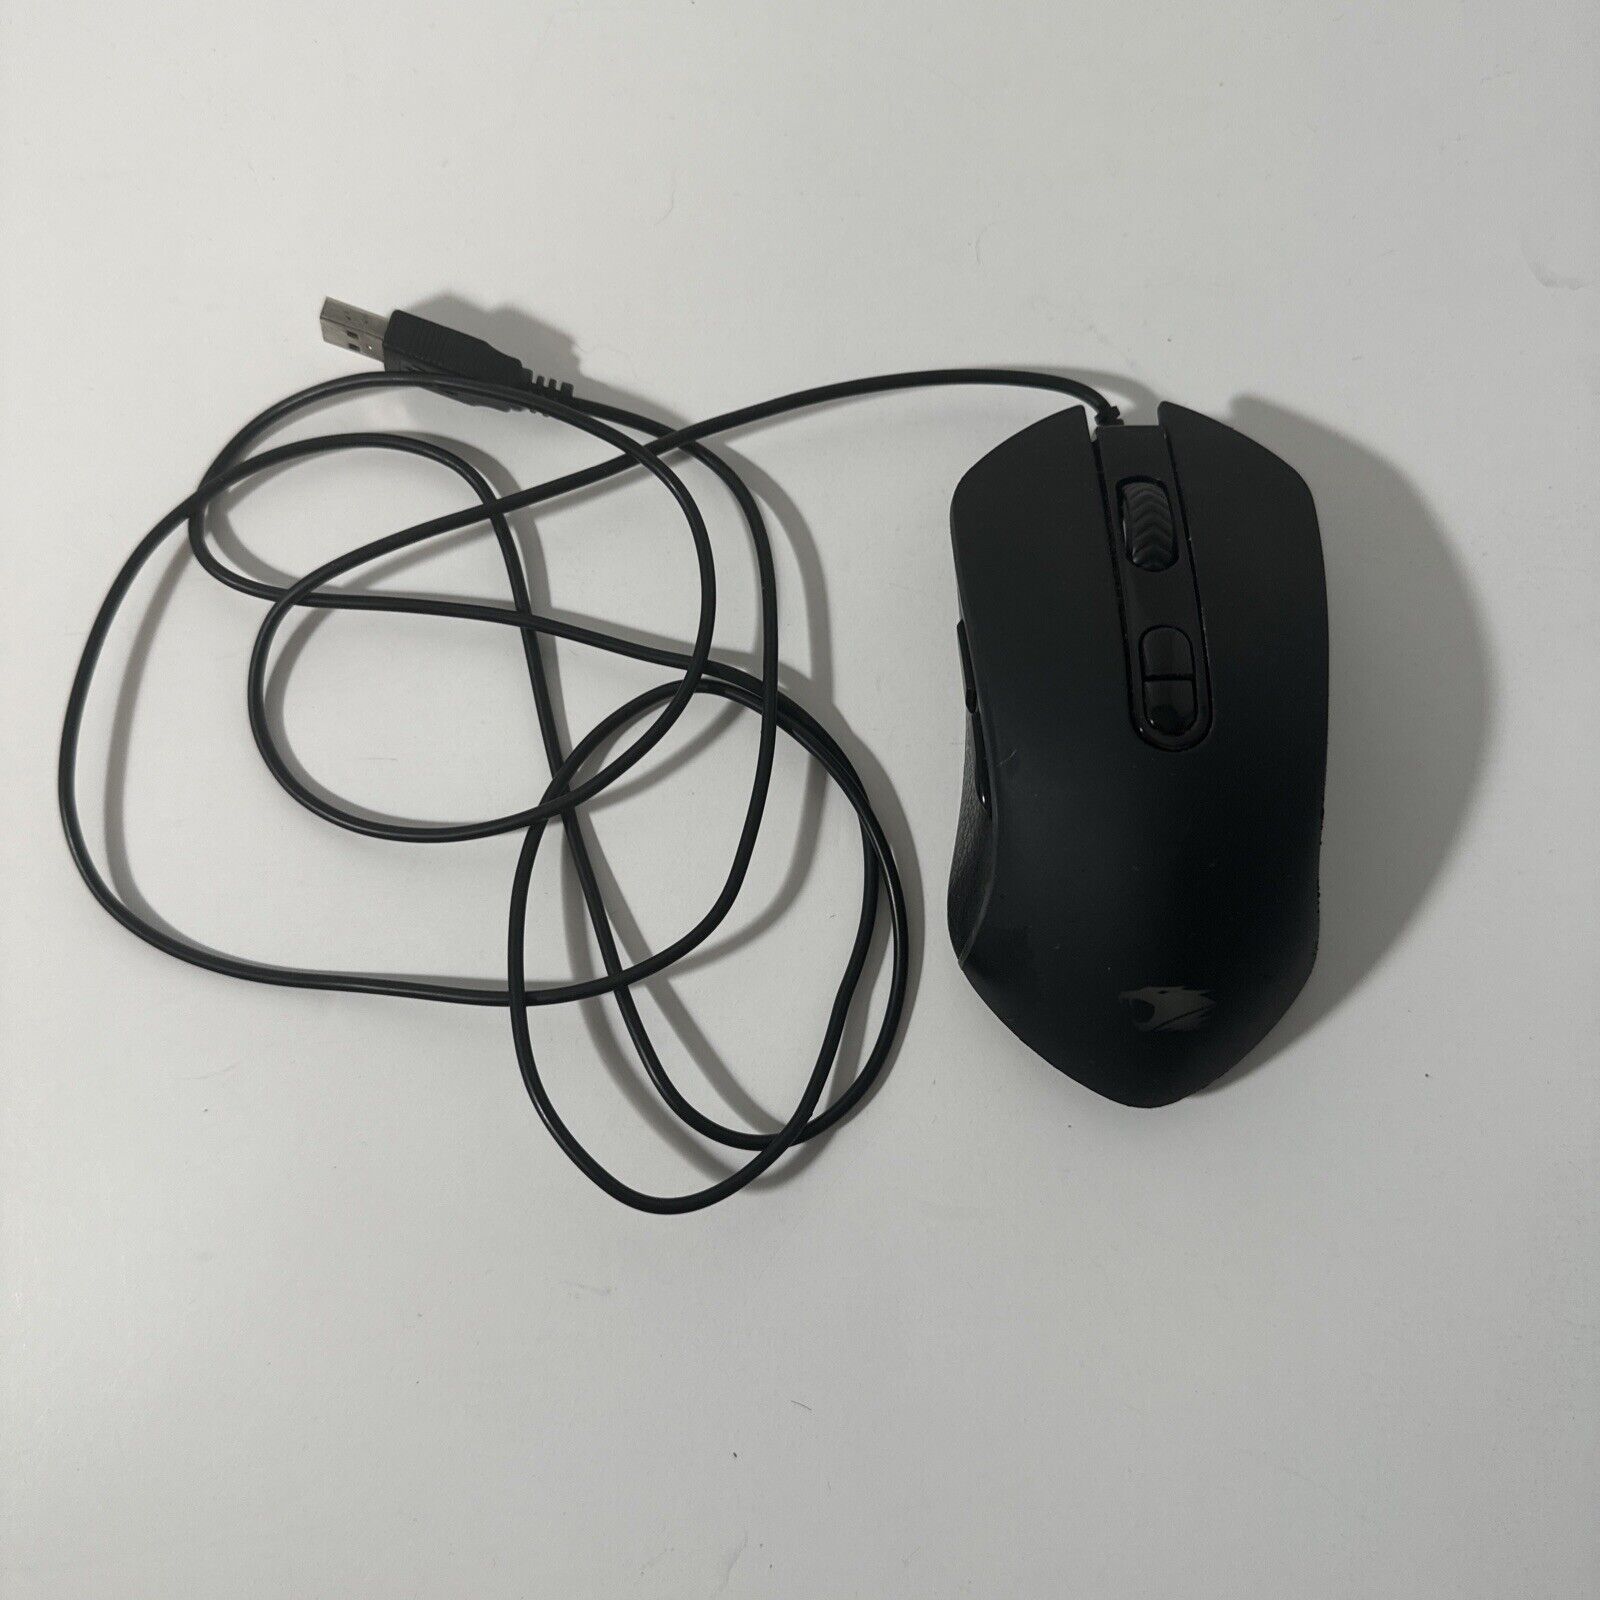 iBuyPower Standard Black USB Mouse  IBP-ARES M2 - Tested And Works